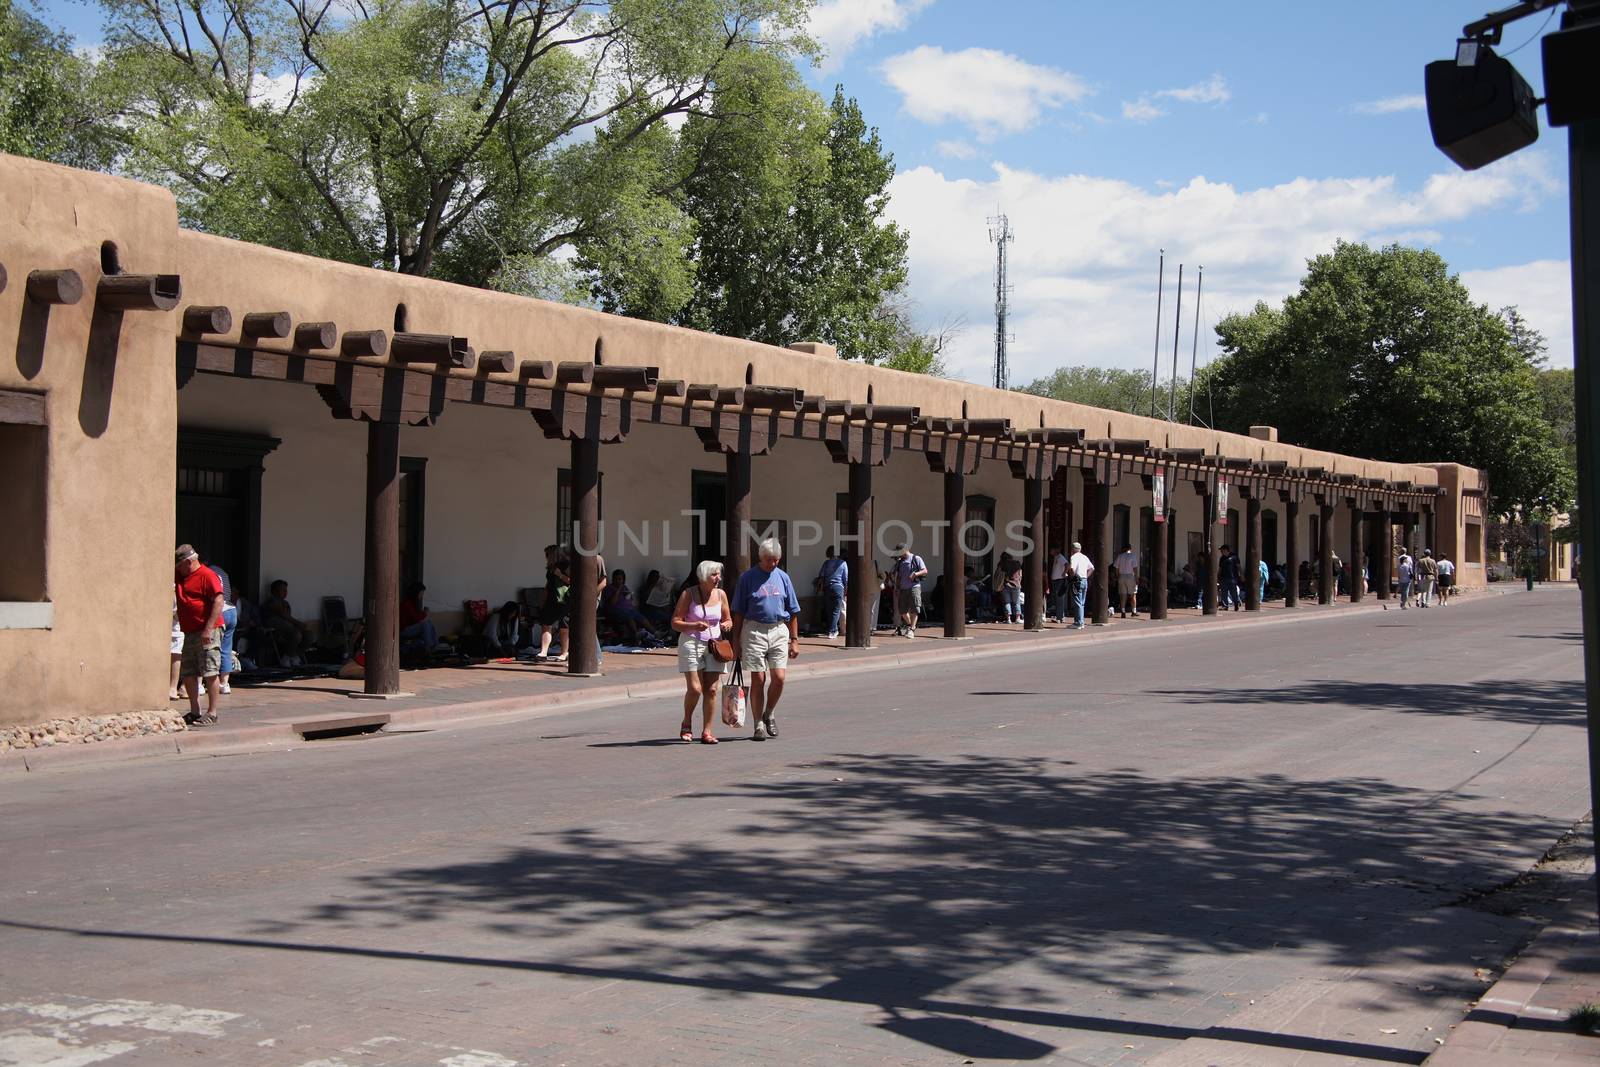 Shoppers and tourists at the Native American market in the Palace of the Governors.